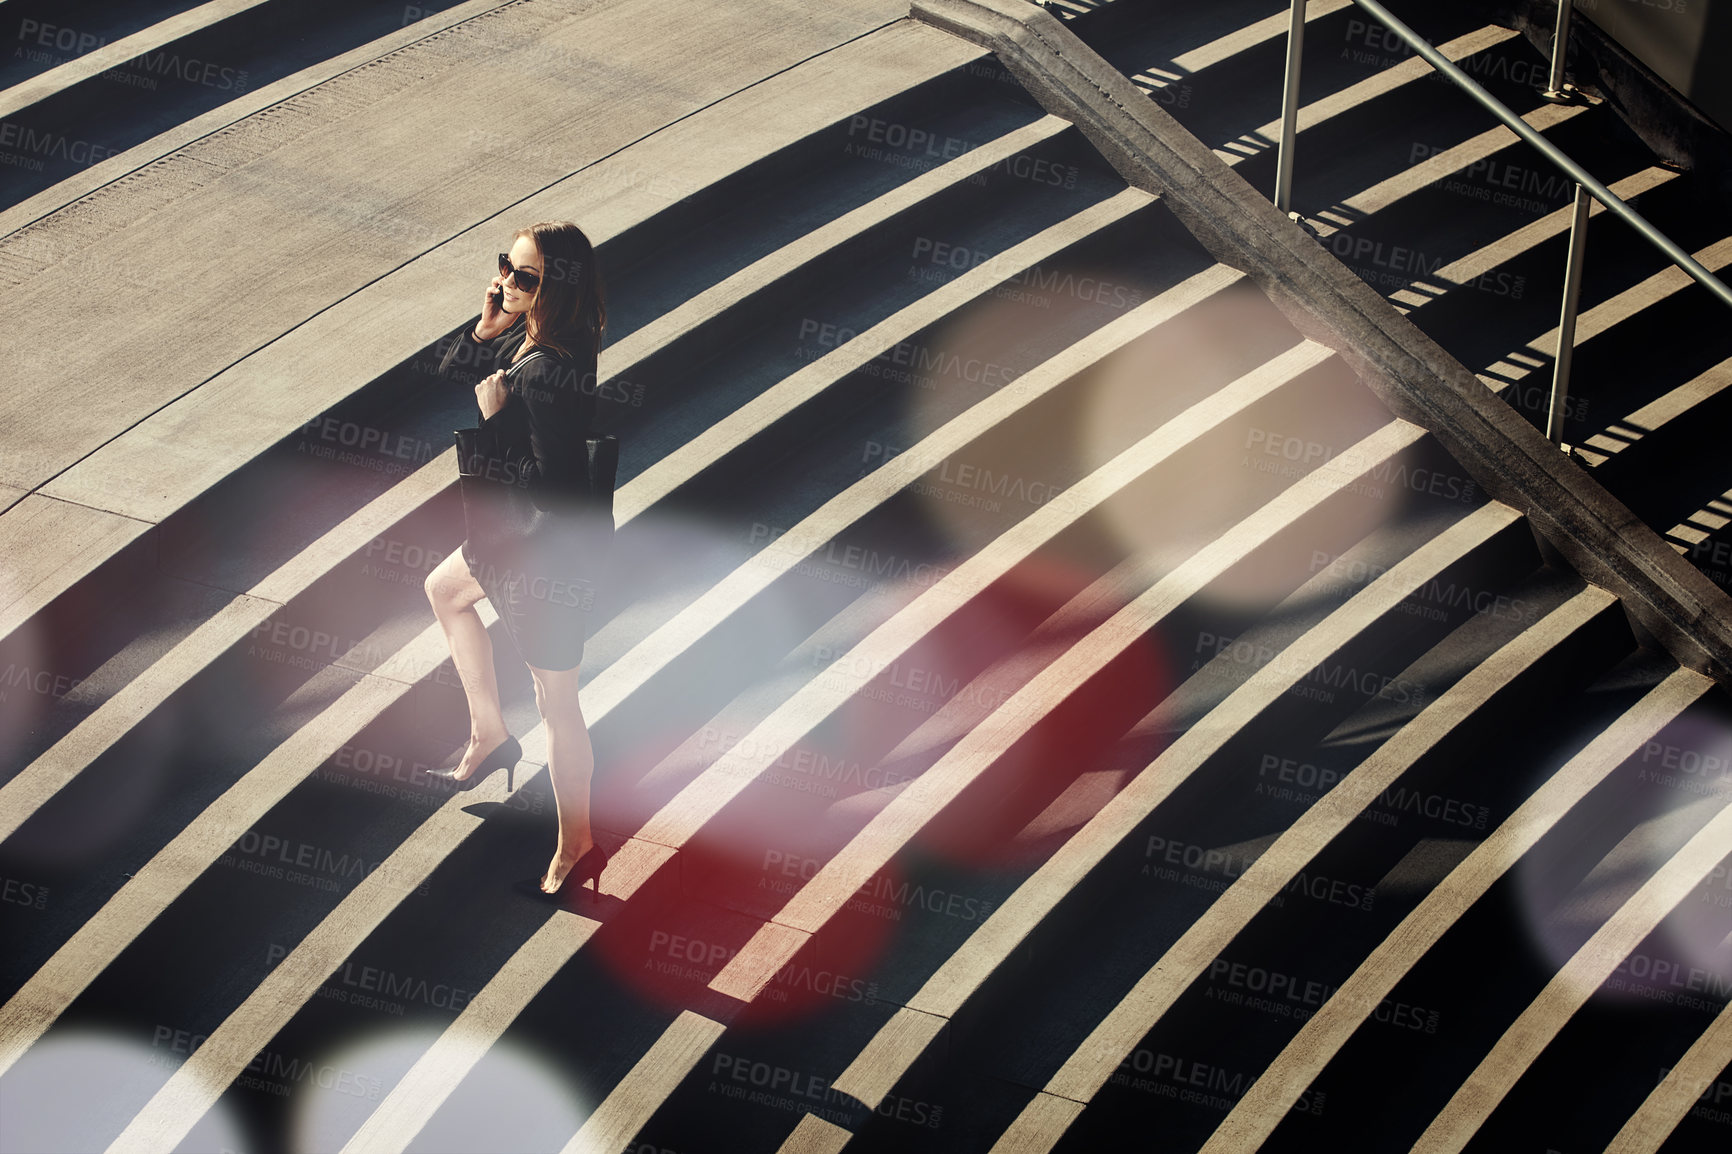 Buy stock photo Shot of a young businesswoman using a mobile phone while walking through the city